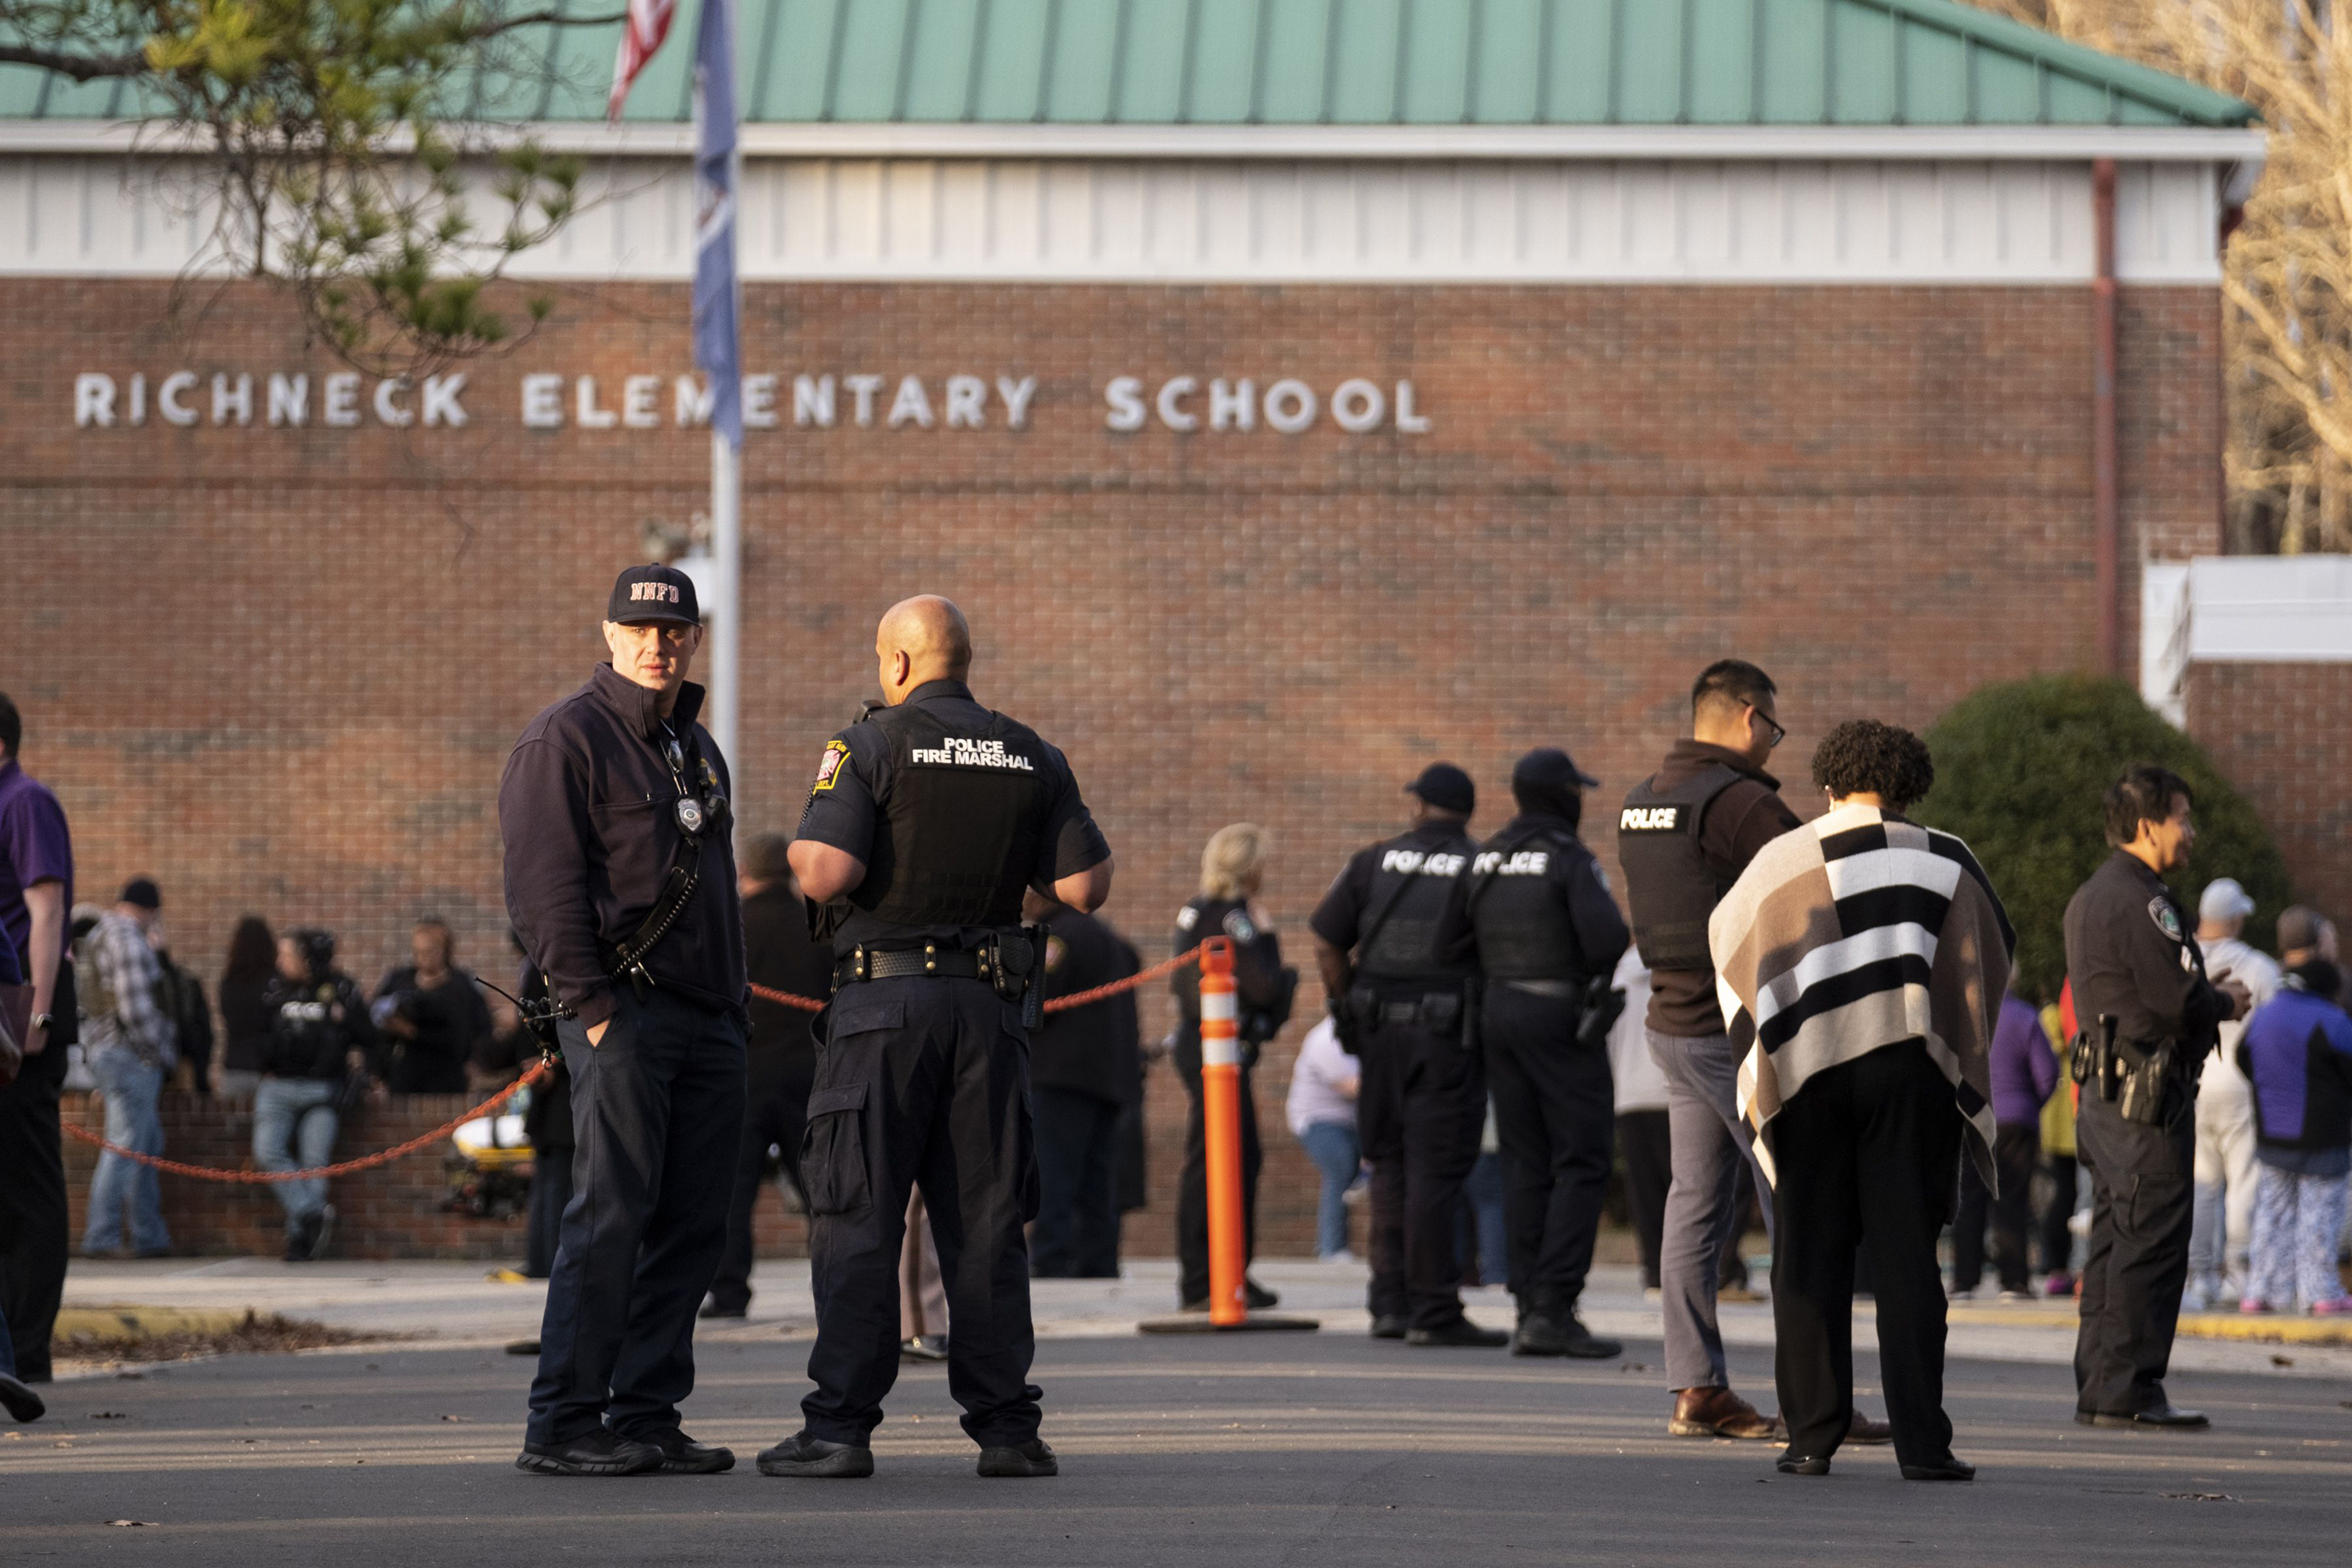 Police respond following a shooting at Richneck Elementary School in Virginia. 